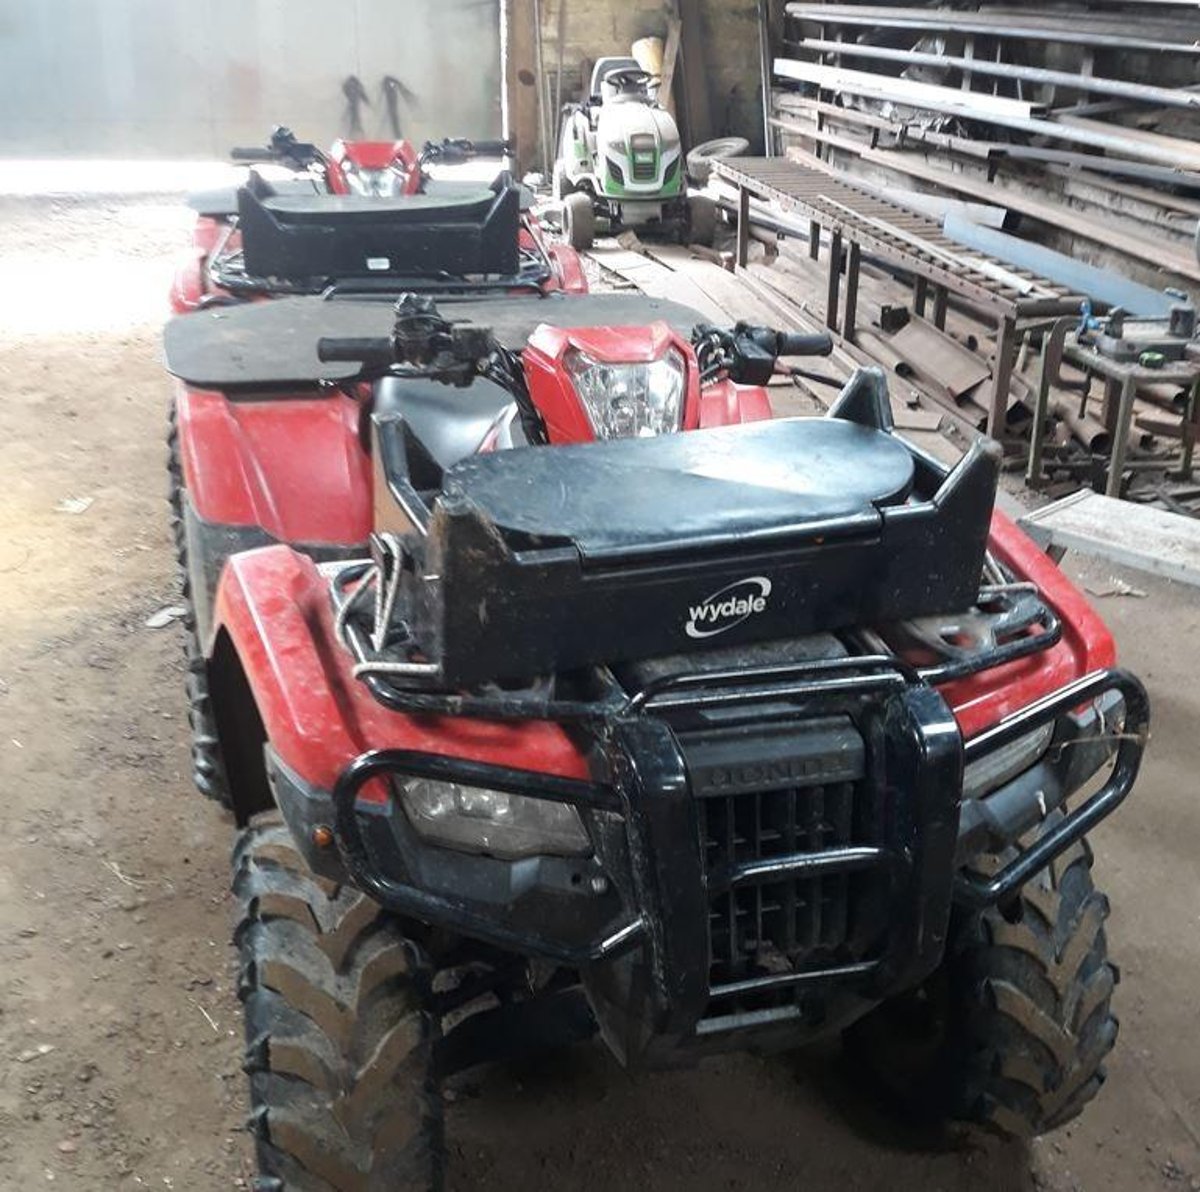 Two men arrested in connection with quad bike thefts in Netherwitton area 